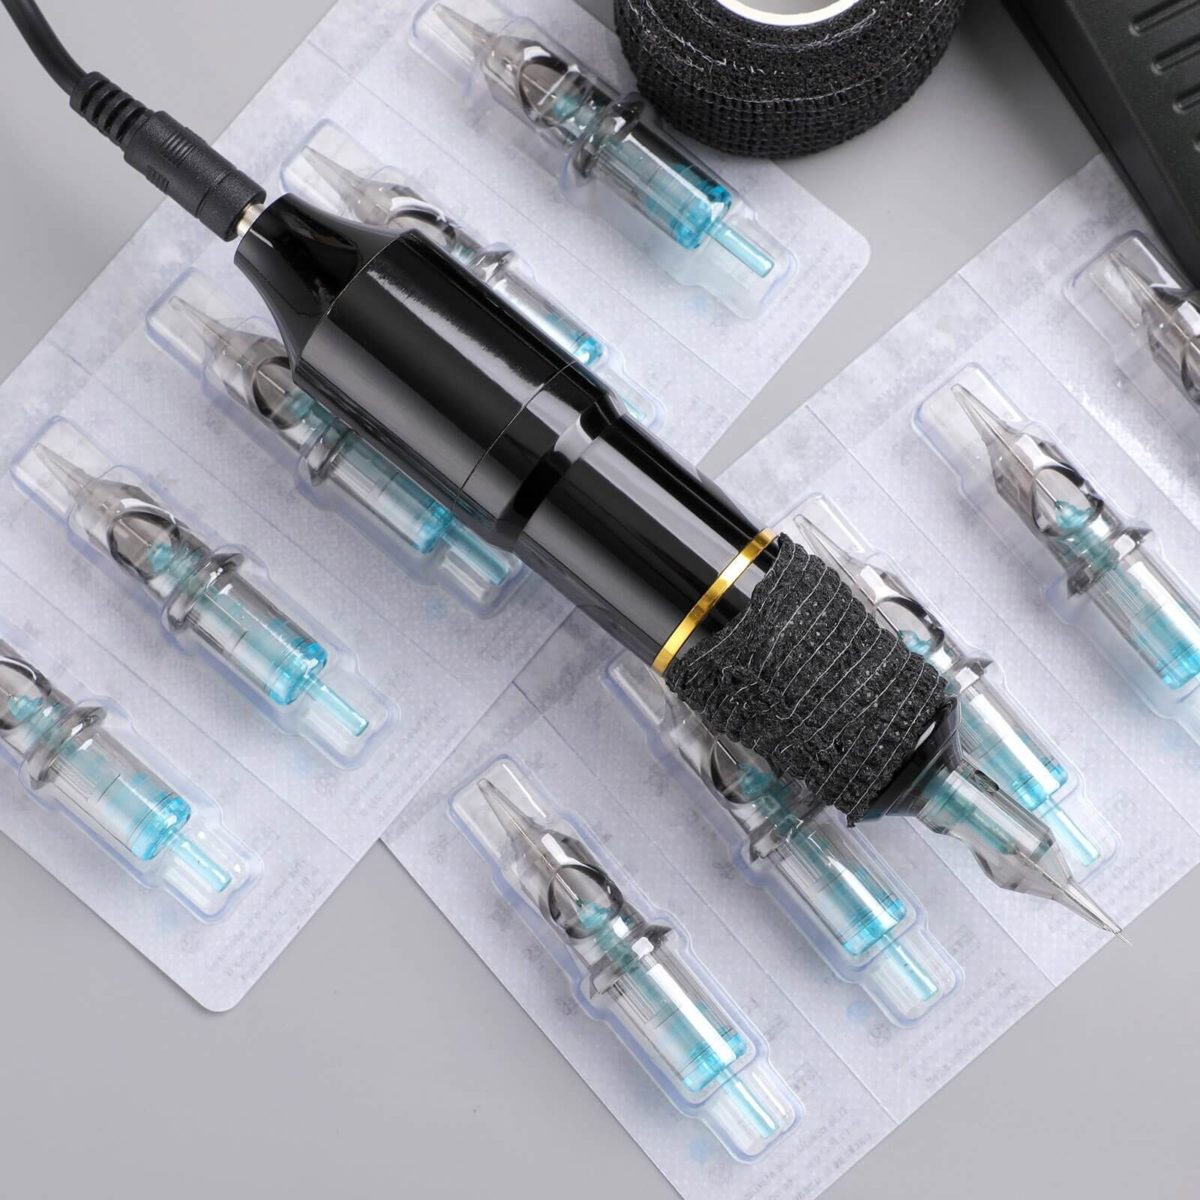 Stigma Rotary Tattoo Pen Kit with 7 color ink